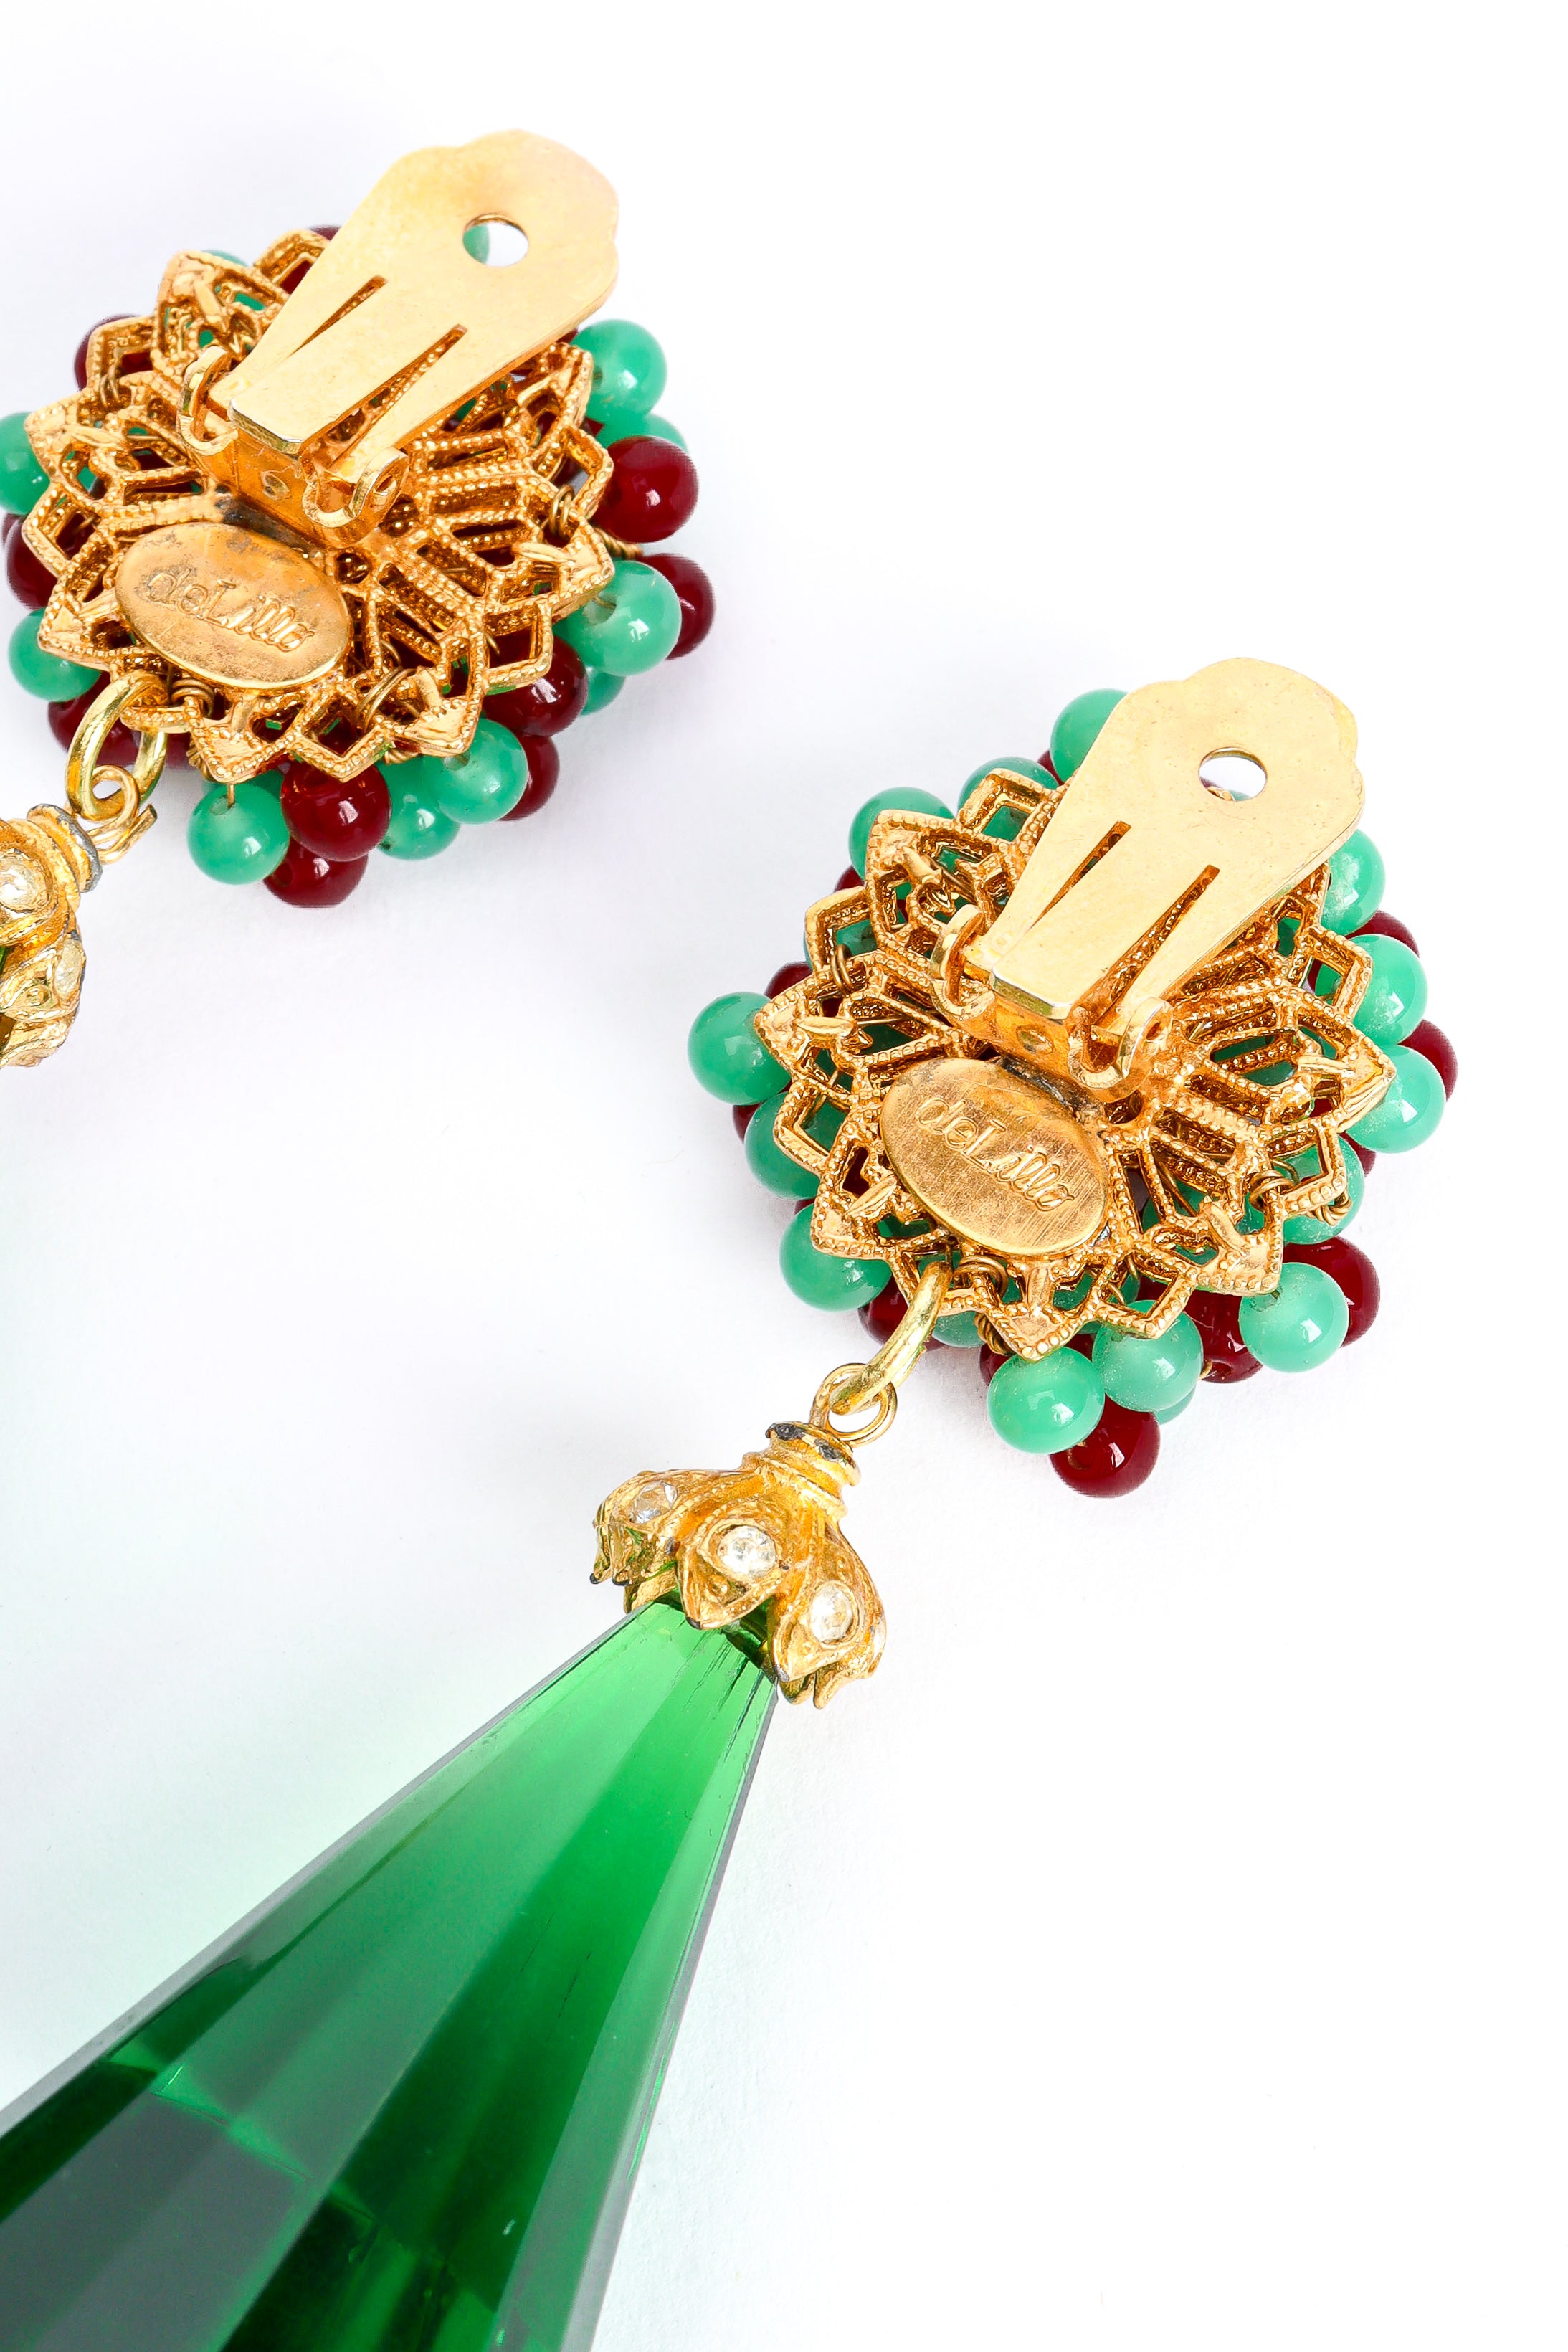 Vintage William deLillo Floral Bead Chunky Emerald Earrings cartouche & back detail @ Recess LA